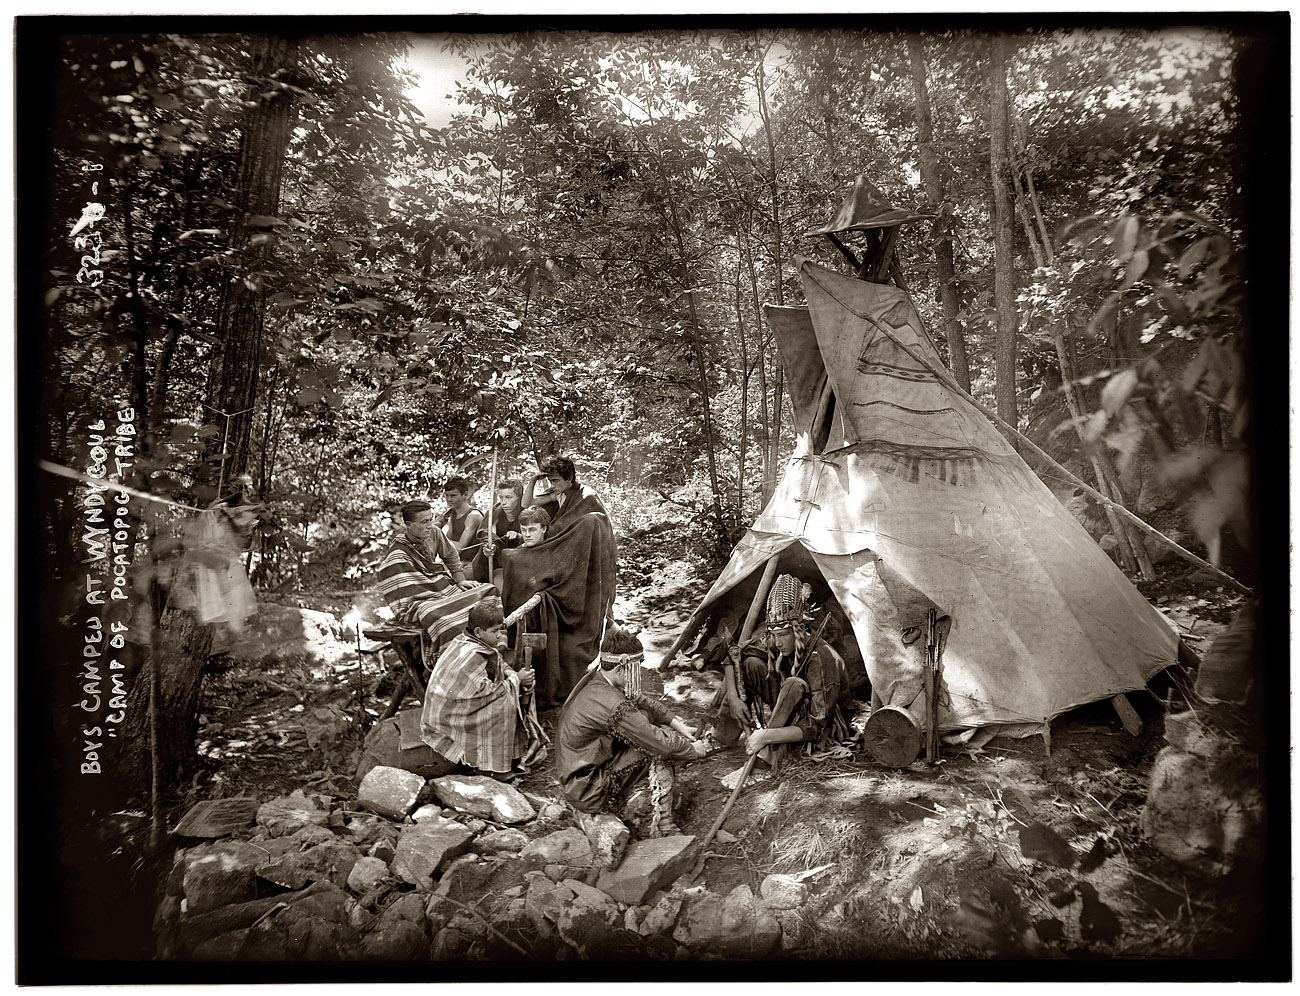 "Boys camped at Wyndygoul, the camp of the Pocatopog tribe" circa 1908. View full size. 8x10 glass plate negative, George Grantham Bain Collection.